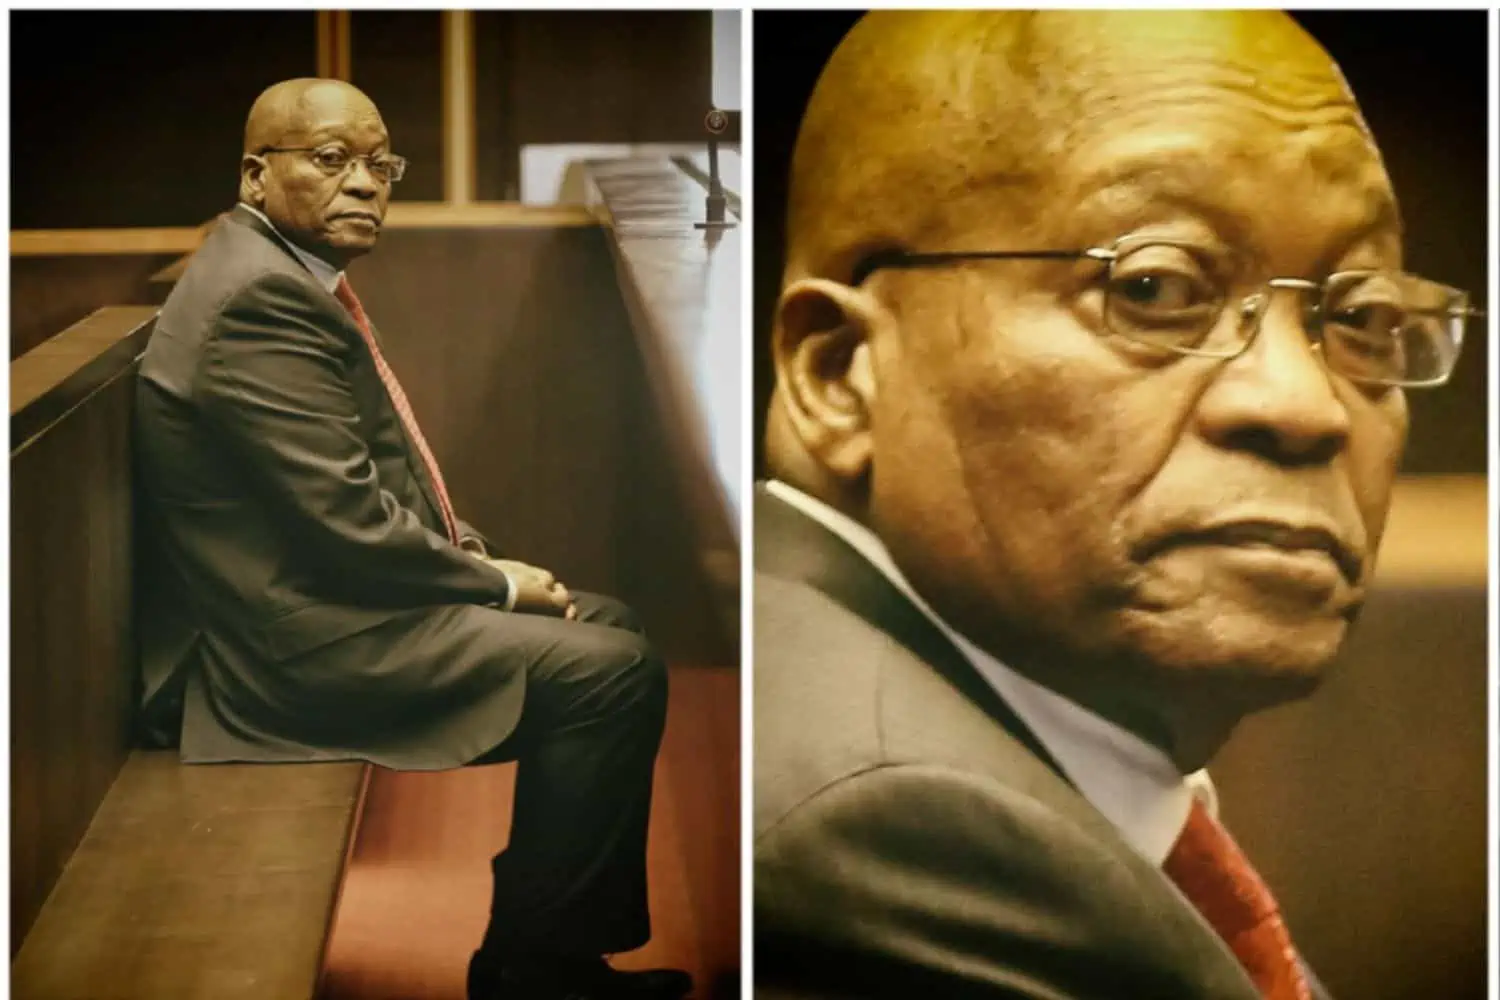 Top News for 4 April 2022 - Zuma's trial to be postponed again?